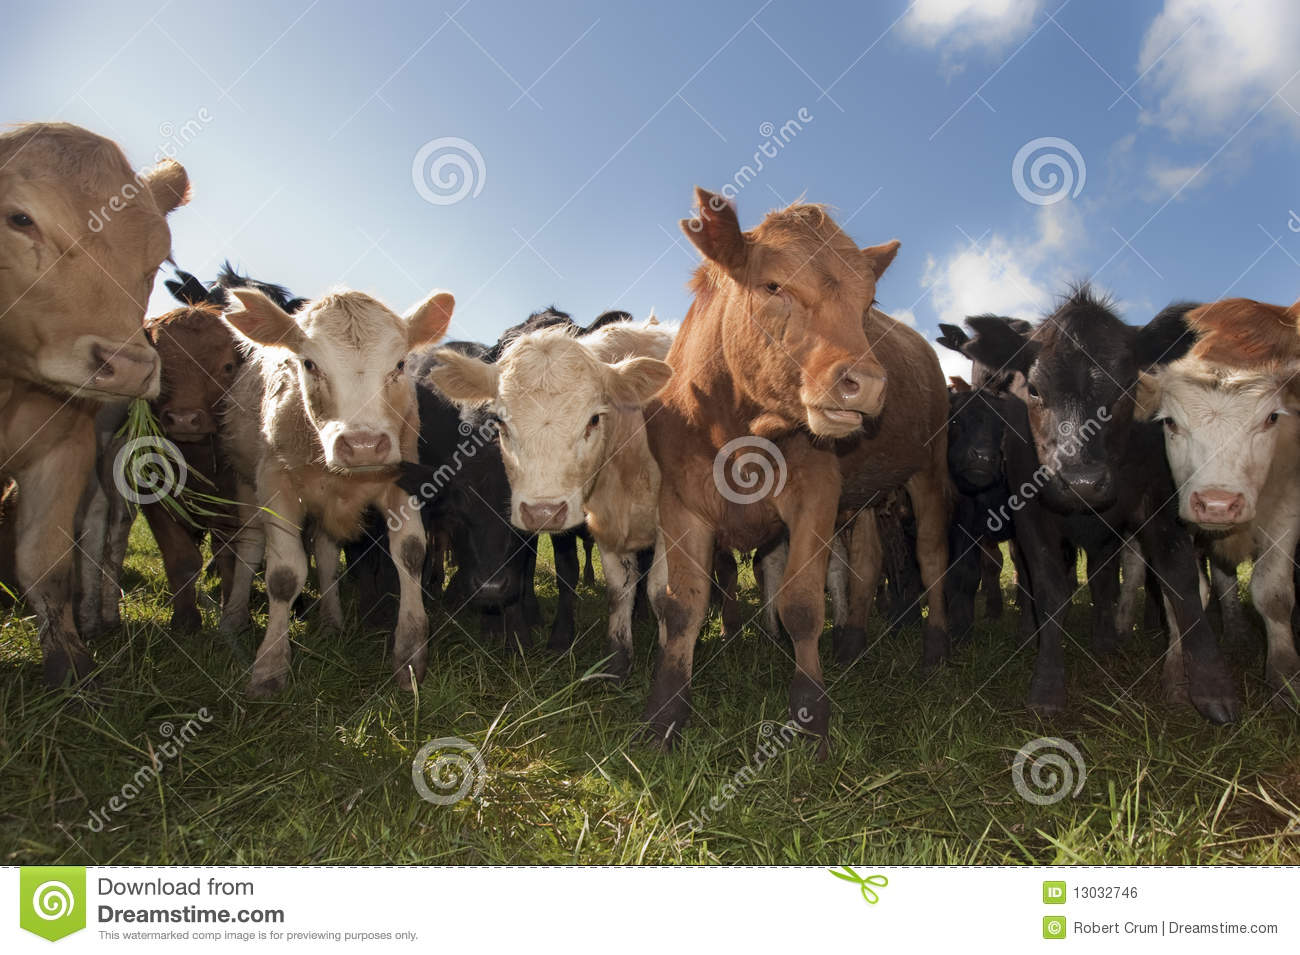 Herd Of Cattle Looking Closely At The Camera